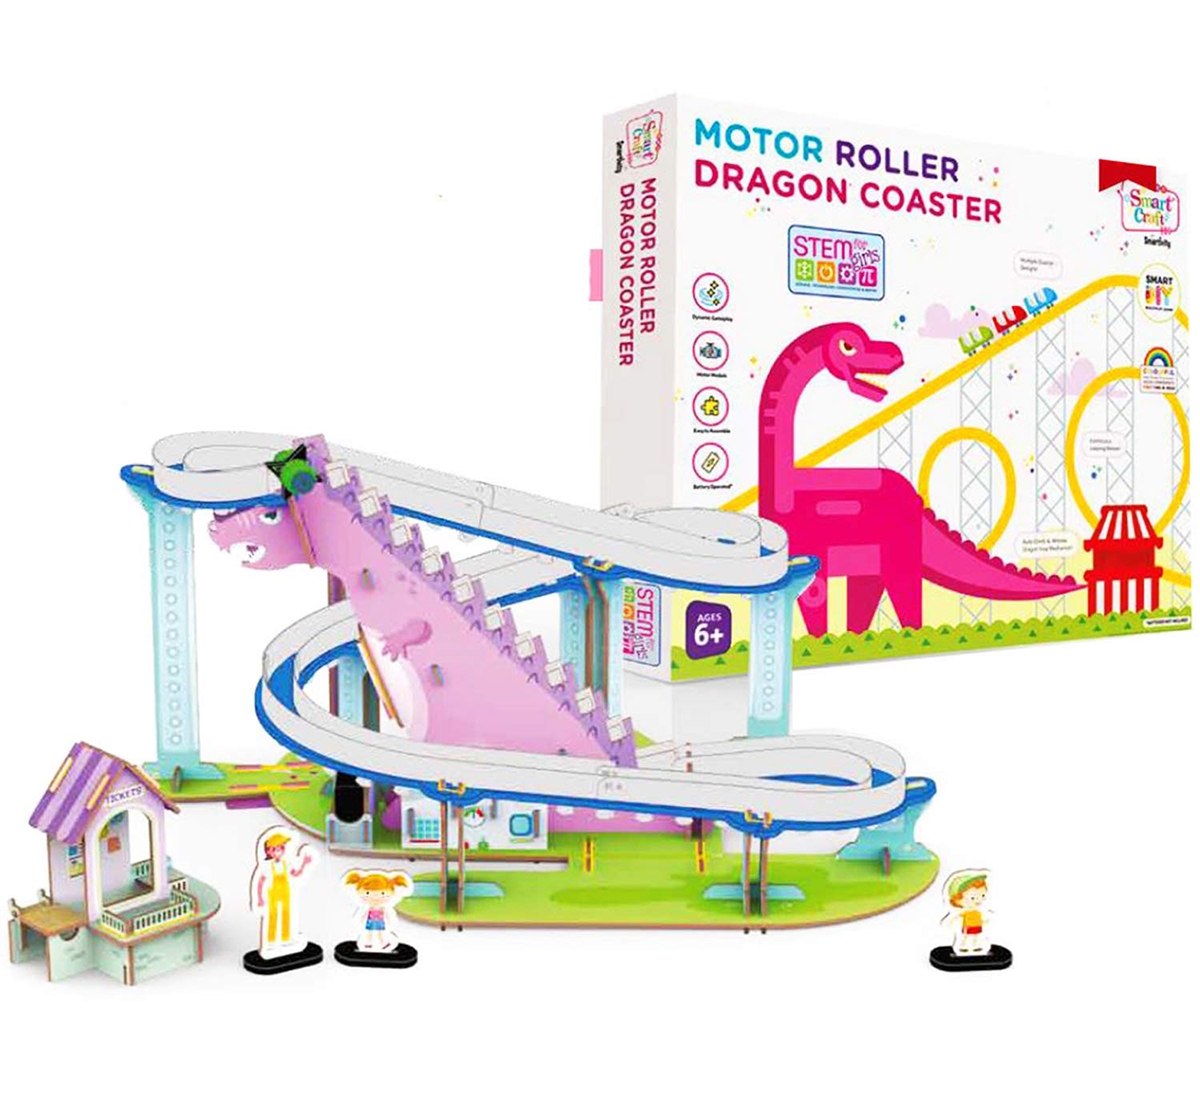 Smartivity | Smartivity Motor Roller Dragon Coaster: Stem, Diy, Educational, Learning, Building and Construction Toy for Kids age 6Y+  1